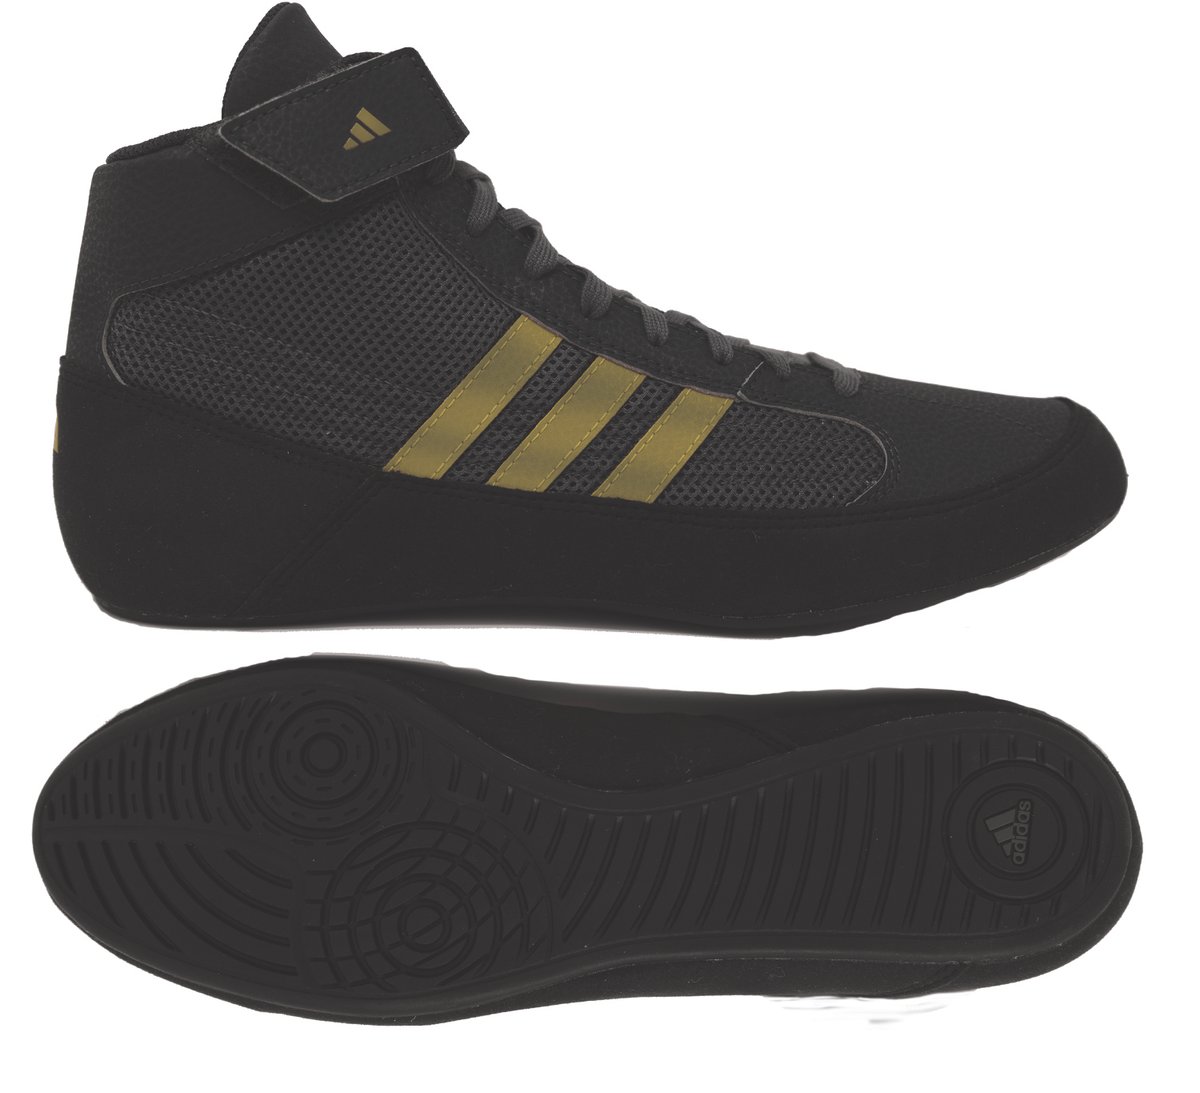 NEW!! Adidas HVC 2 Wrestling Shoes, color: Black/Charcoal/Gold